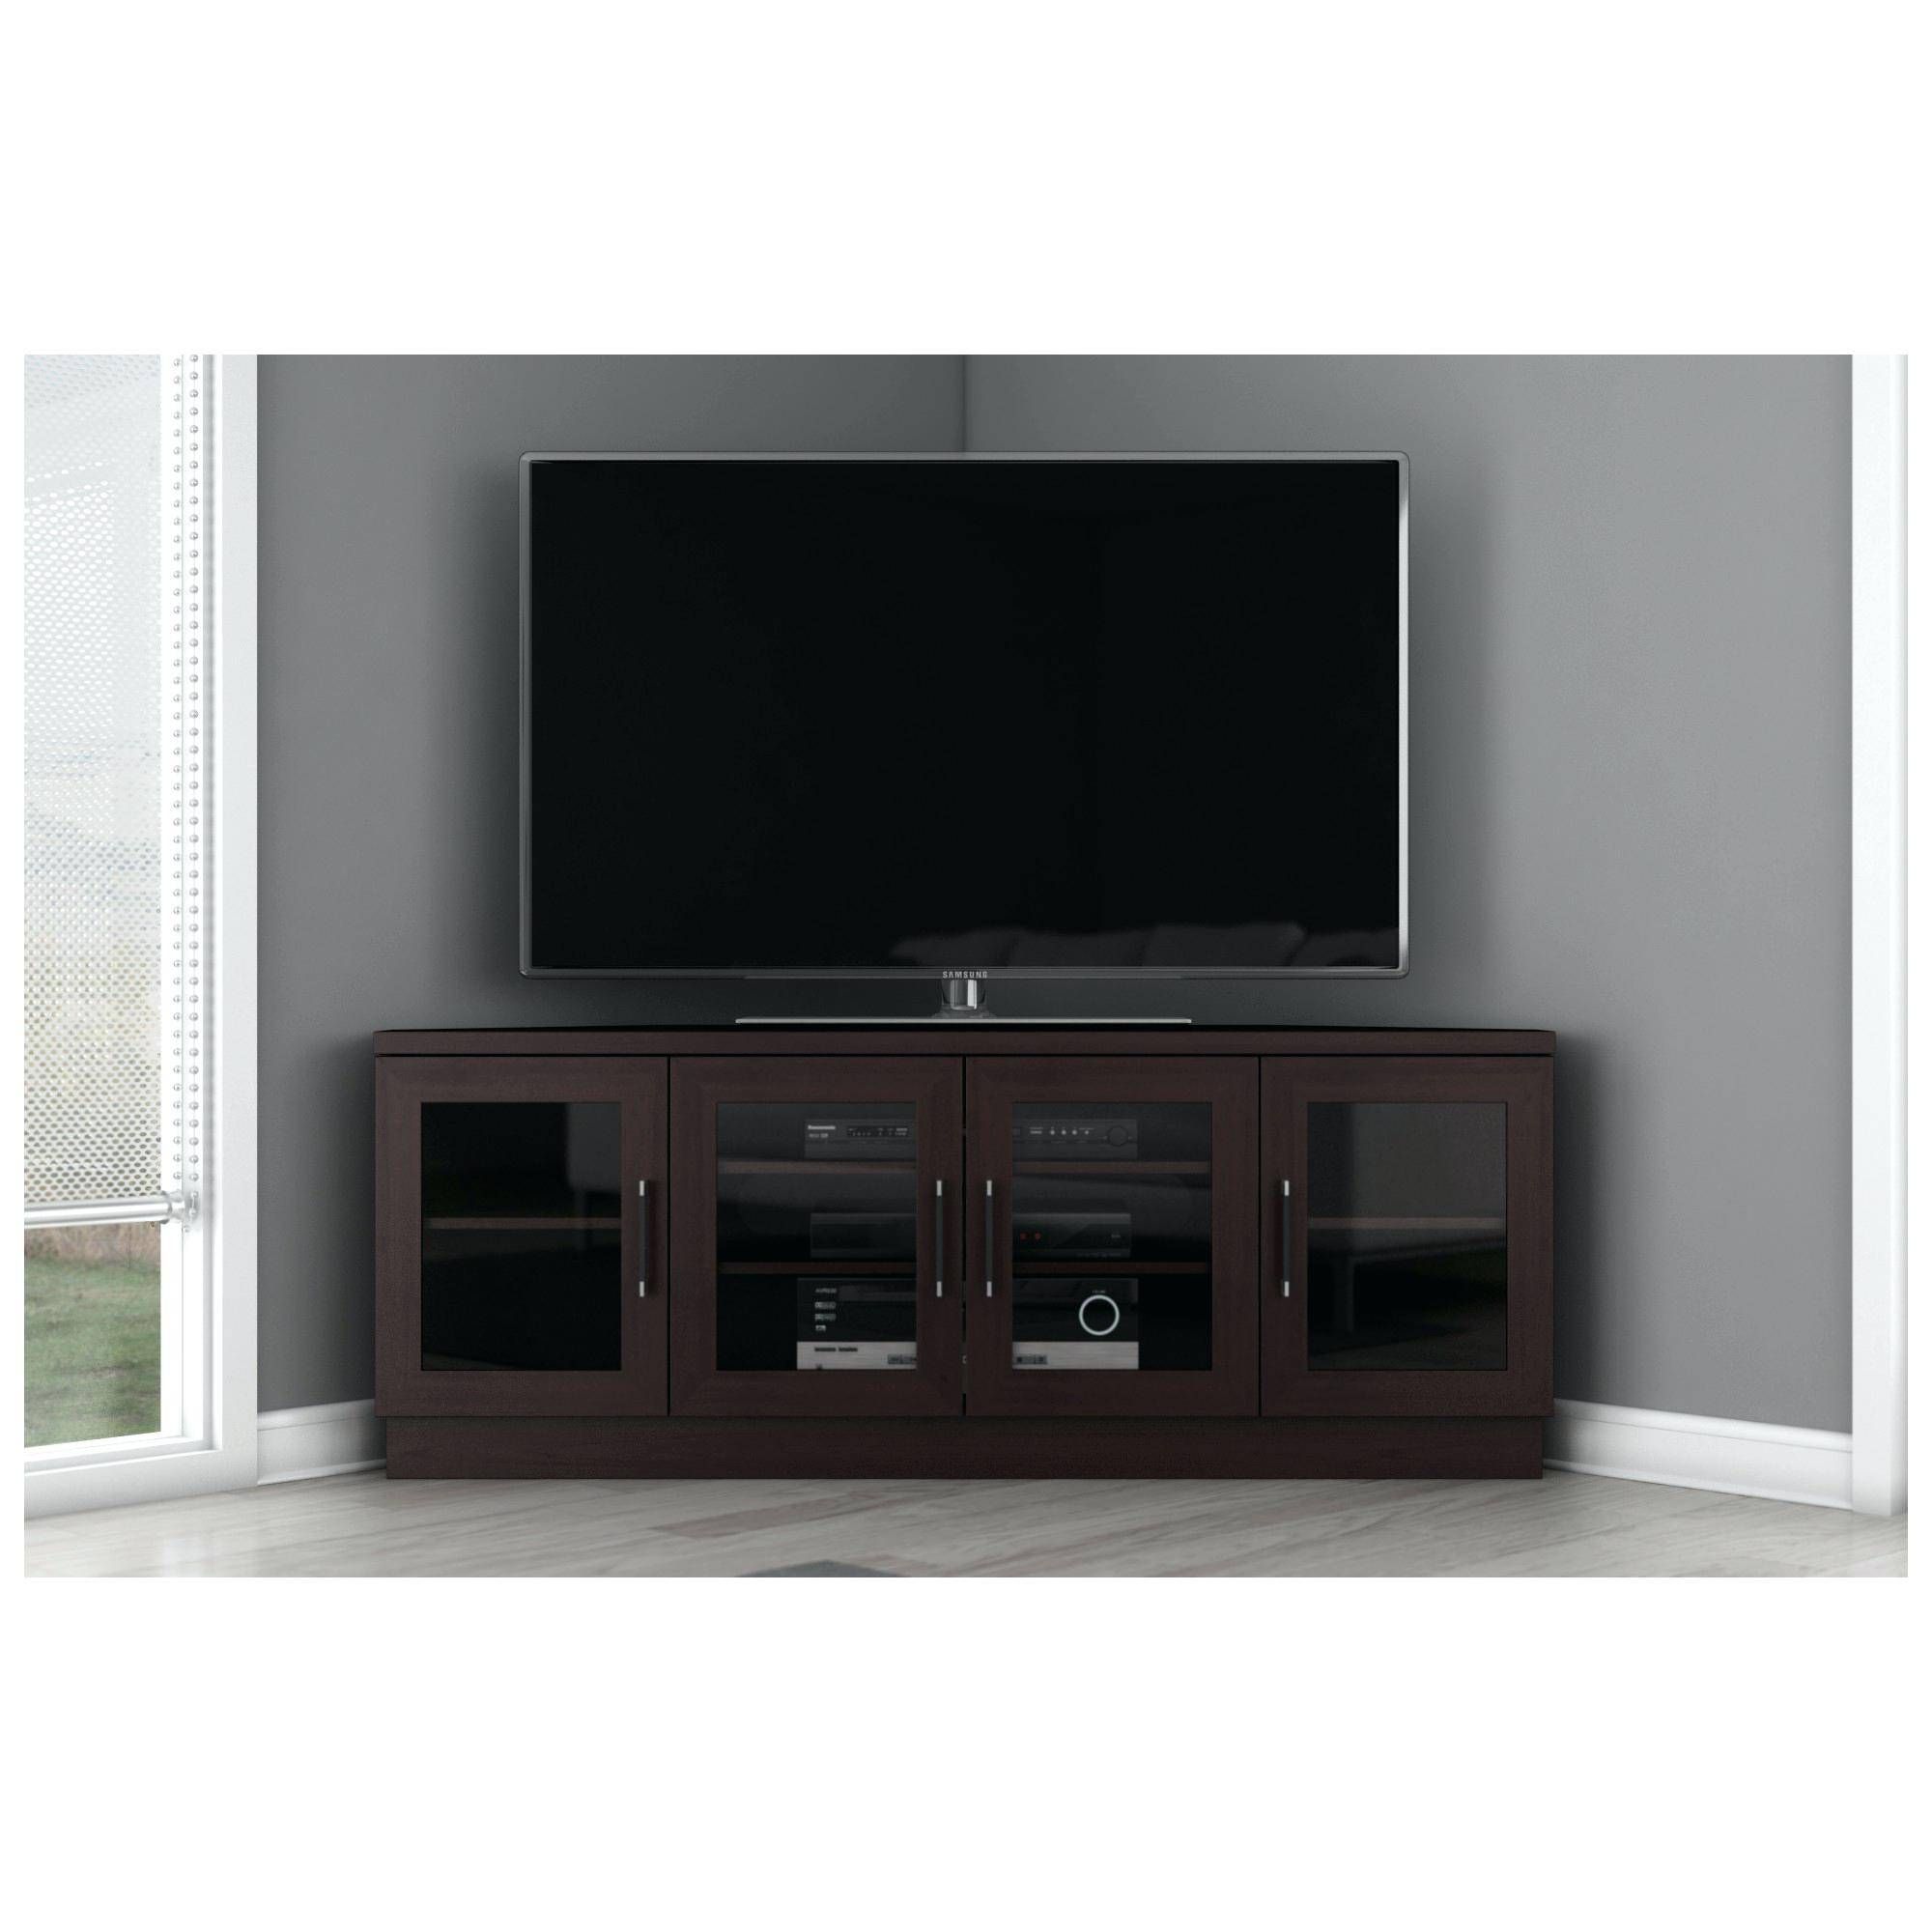 Tv Stand : 131 Black Corner Tv Stand For 60 Inch Tv Wonderful Pertaining To Corner 60 Inch Tv Stands (Photo 6 of 15)